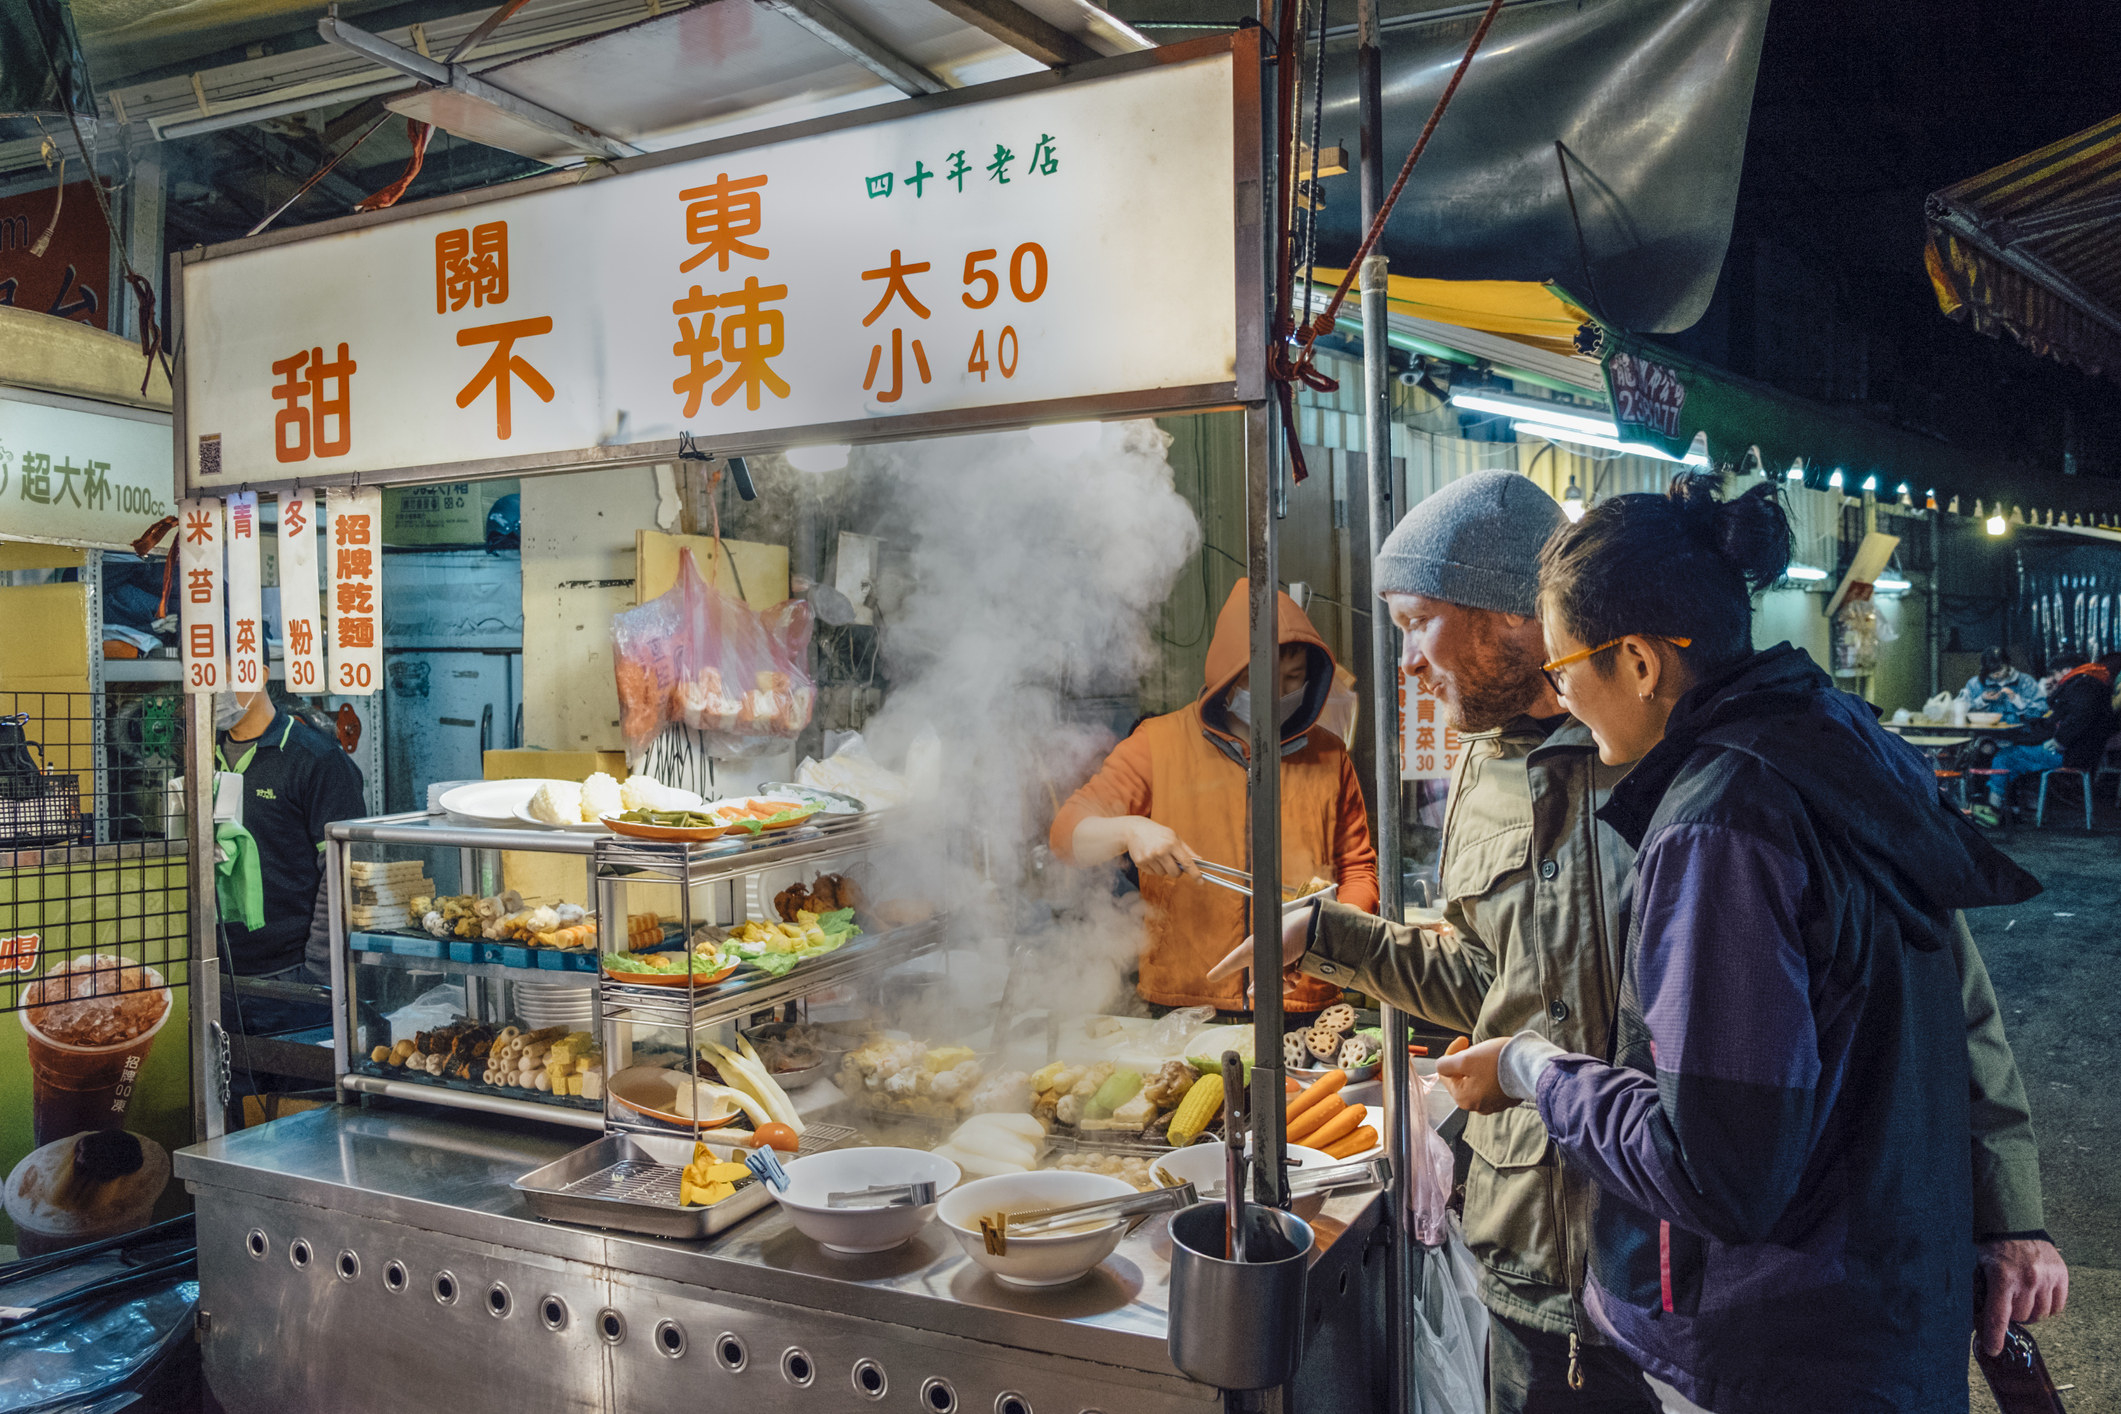 A street food stall in Asia.